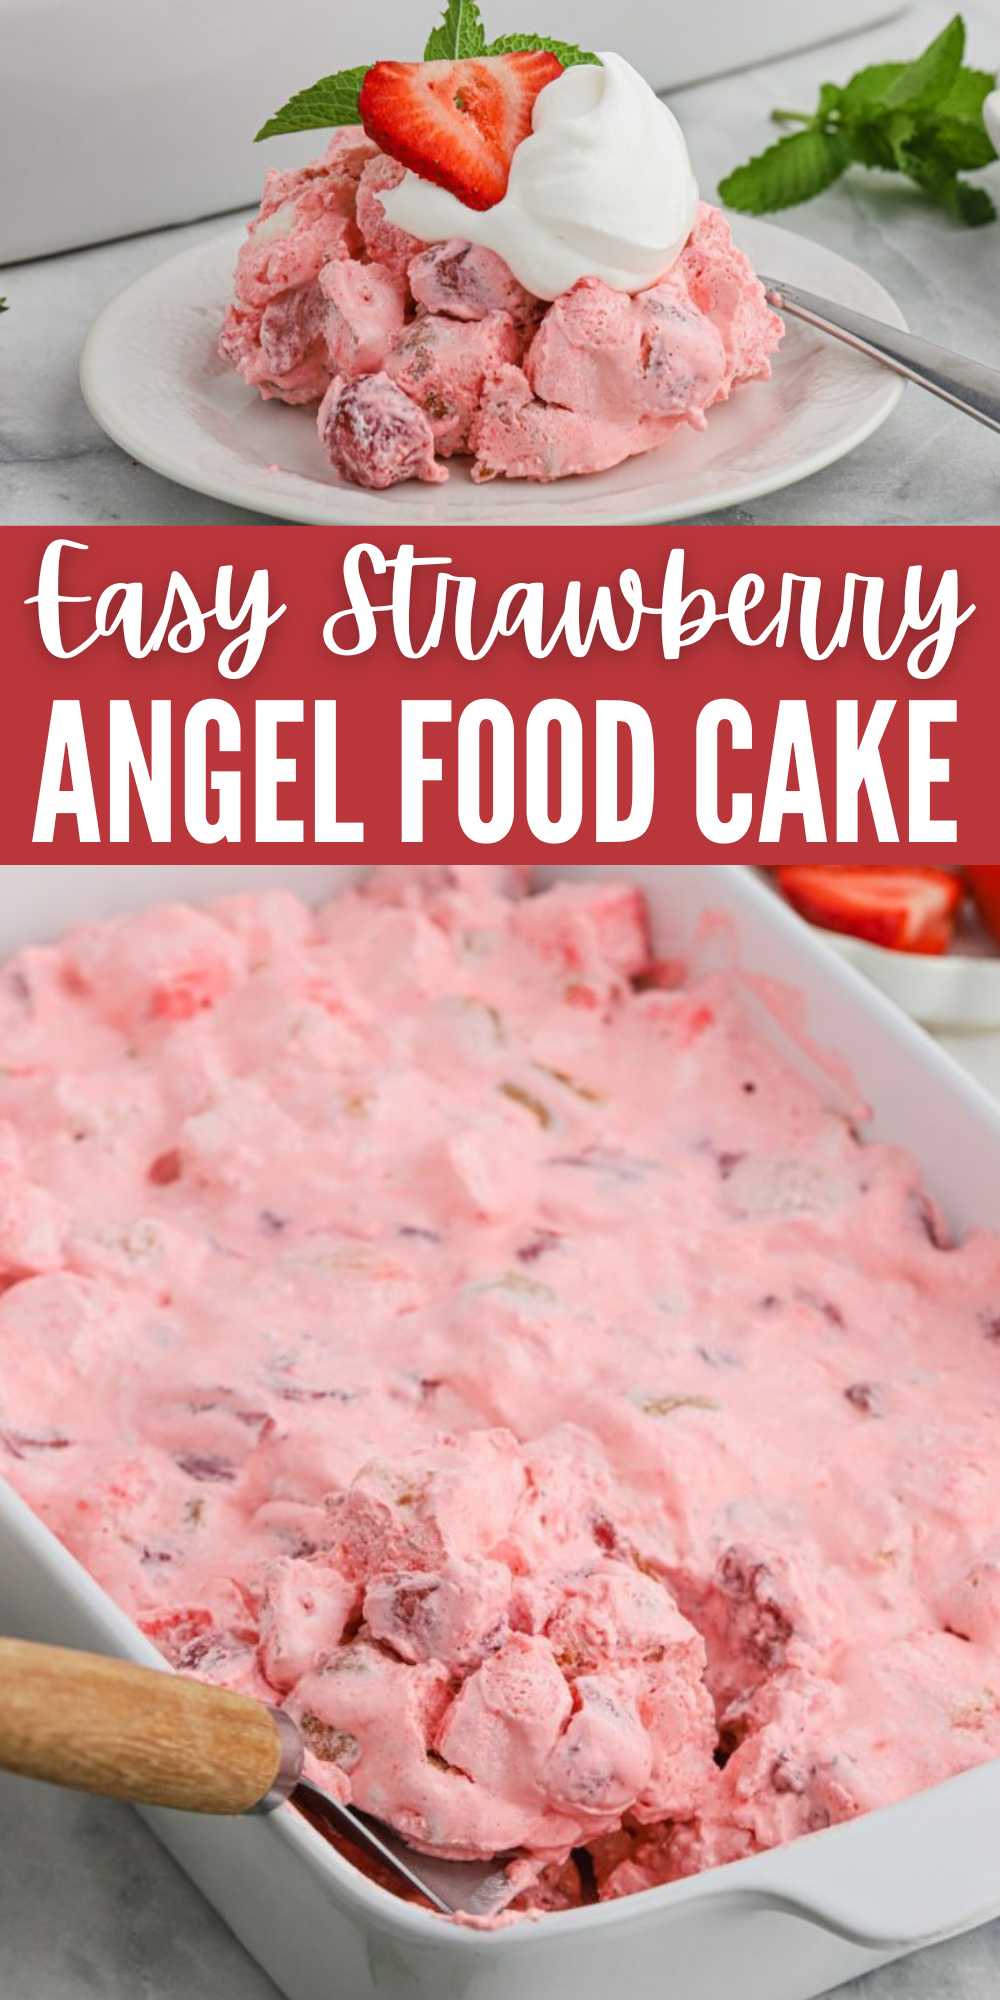 Strawberry Angel Food Cake is loaded with delicious strawberry flavor. This special occasion dessert is easy to make with simple ingredients. This strawberry angel food cake dessert reminds me of a strawberry shortcake. The cream texture and the amazing flavor will have you coming back for more. #eatingonadime #strawberryangelfoodcake #angelfoodcake